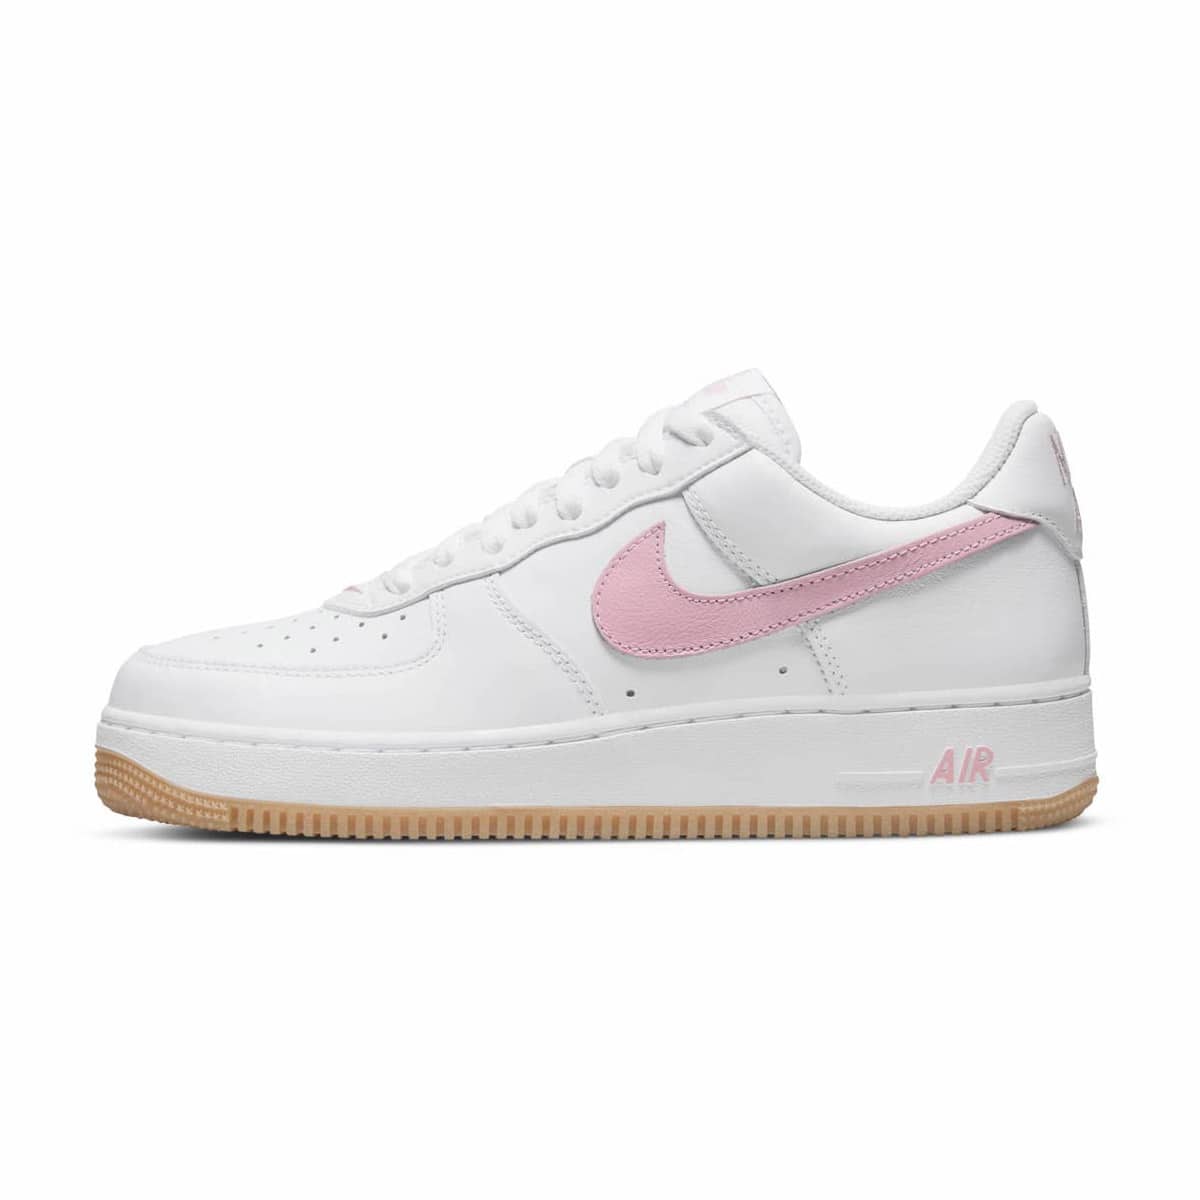 Nike Air Force 1 Low Color of the month White Pink DM0576-101 2